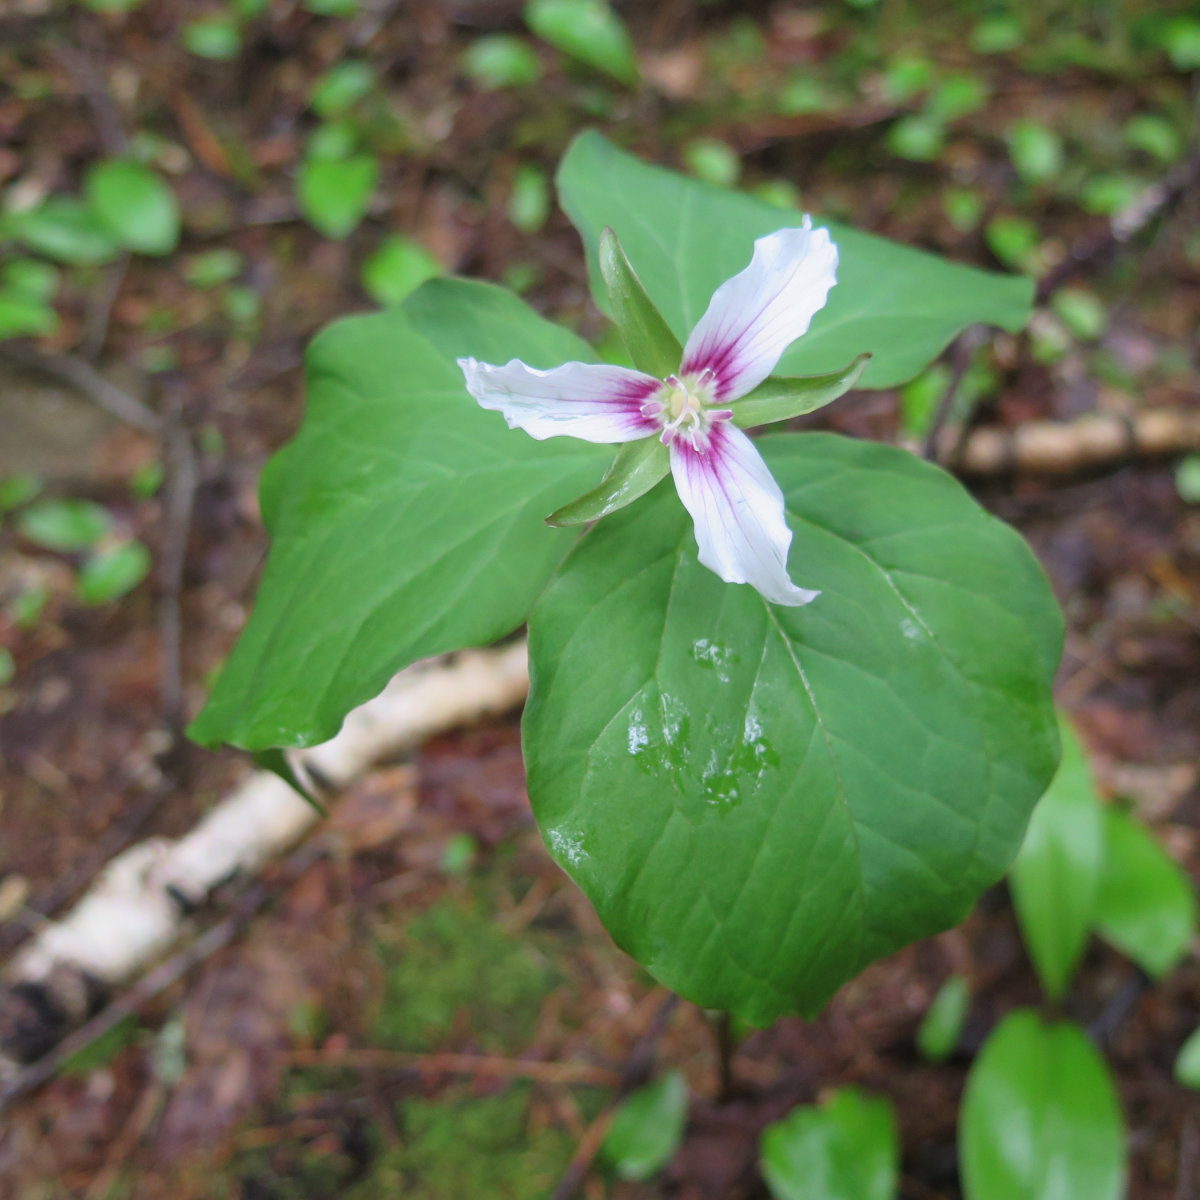 Painted trillium found at trailside on Sandwich Mountain, White Mountain National Forest, New Hampshire.